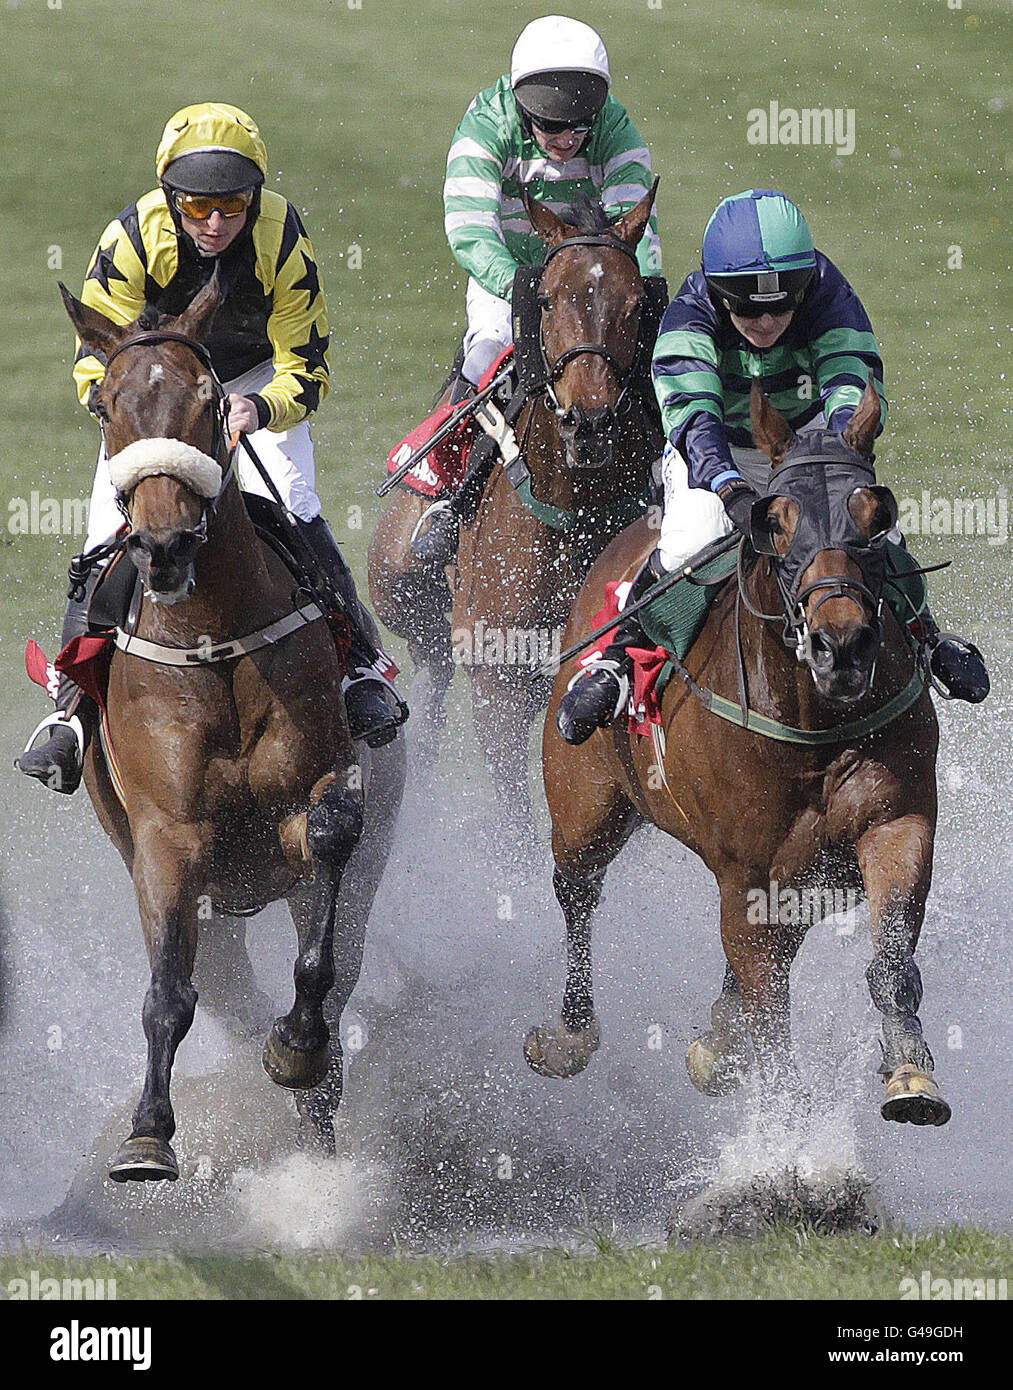 Horses clear the water in the Kildare Hunt Club Fr Sean Breen Memorial Chase For The Ladies Perpetual Cup during the Boylesports.com Champion Chase Day at Punchestown Racecourse, Naas, Ireland. Stock Photo